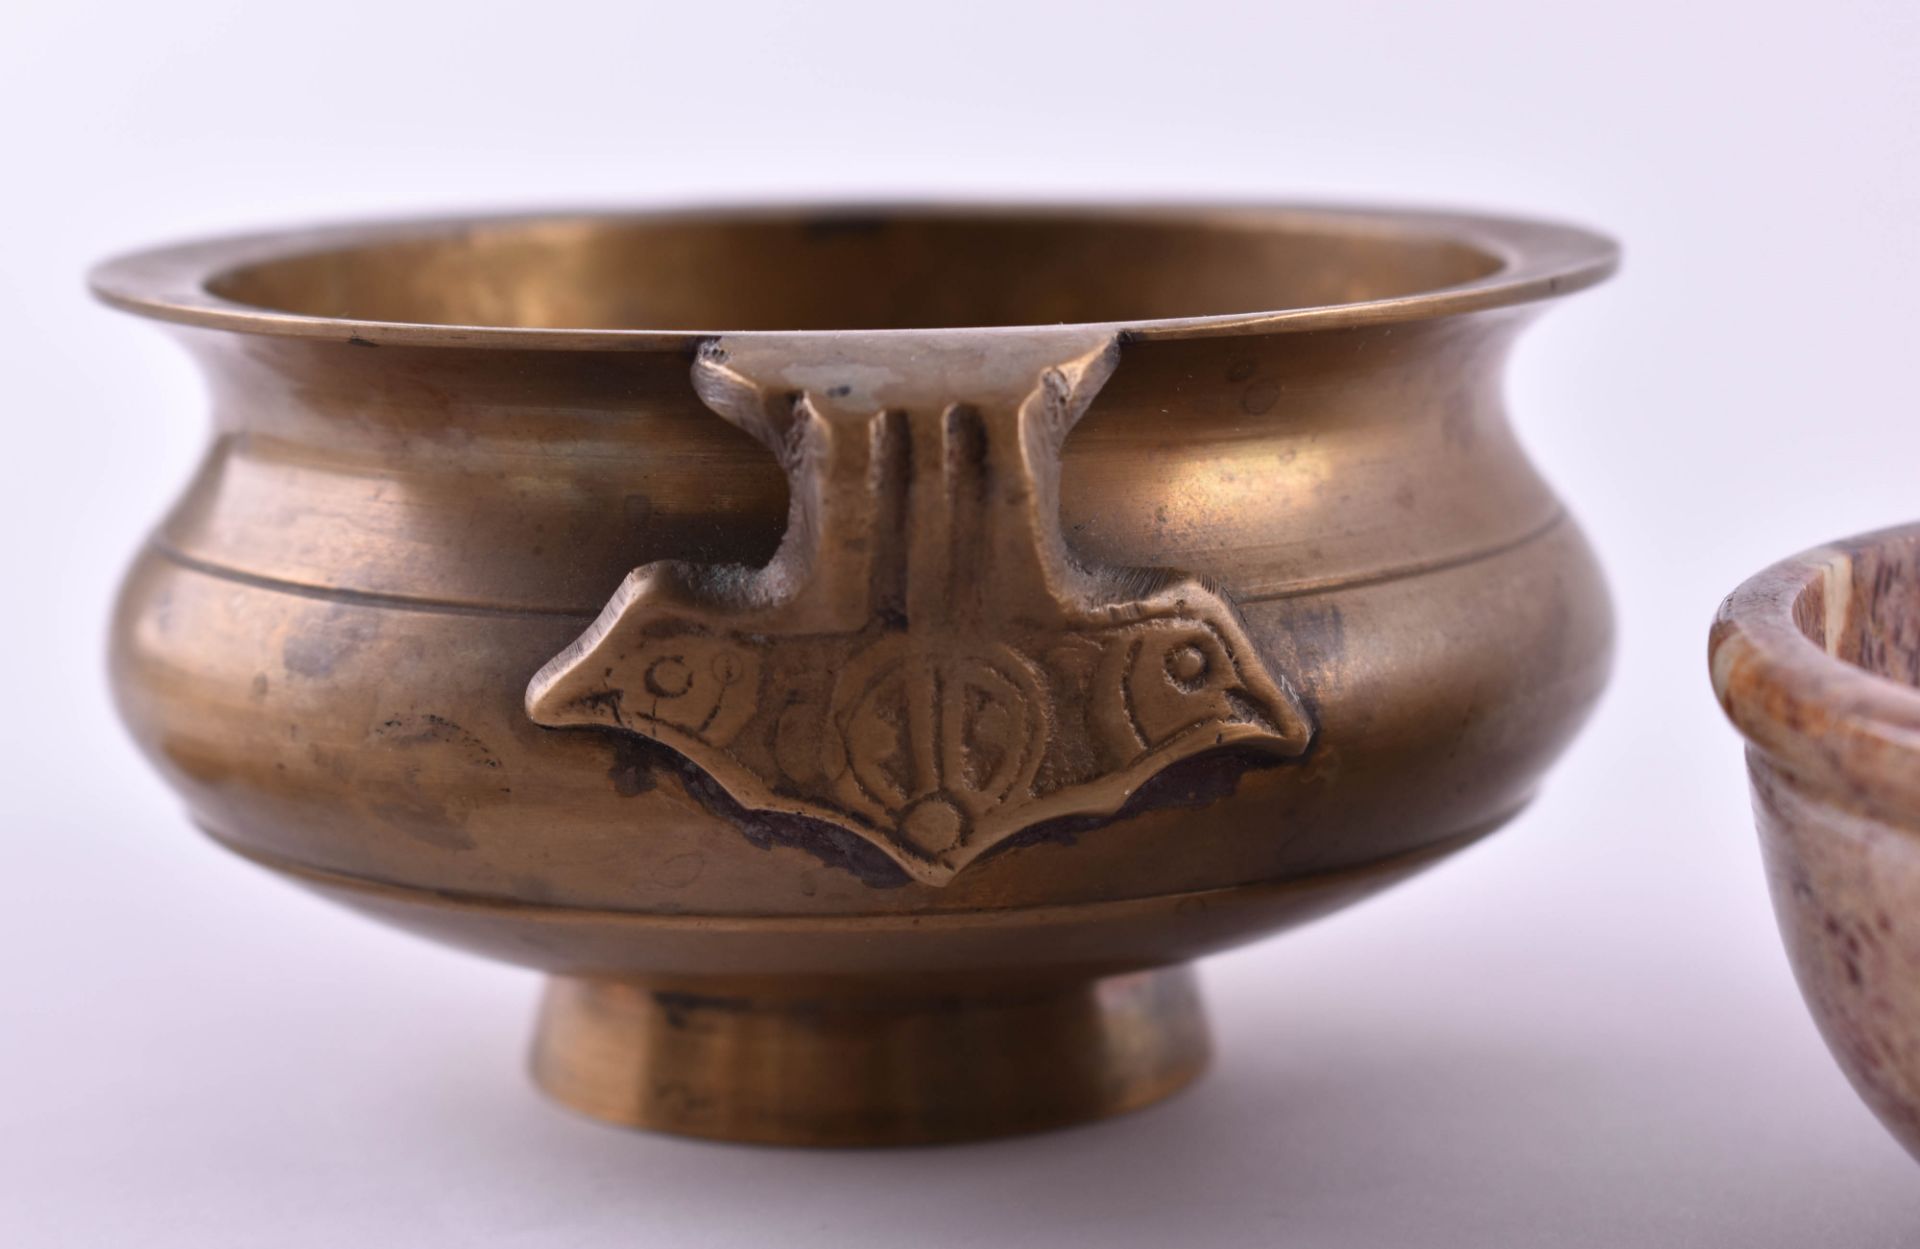 A group of bowls and medallions2 bowls (brass and stone), dimensions: 10 x 6 cm and 10 x 4 cm, 9 - Bild 6 aus 6